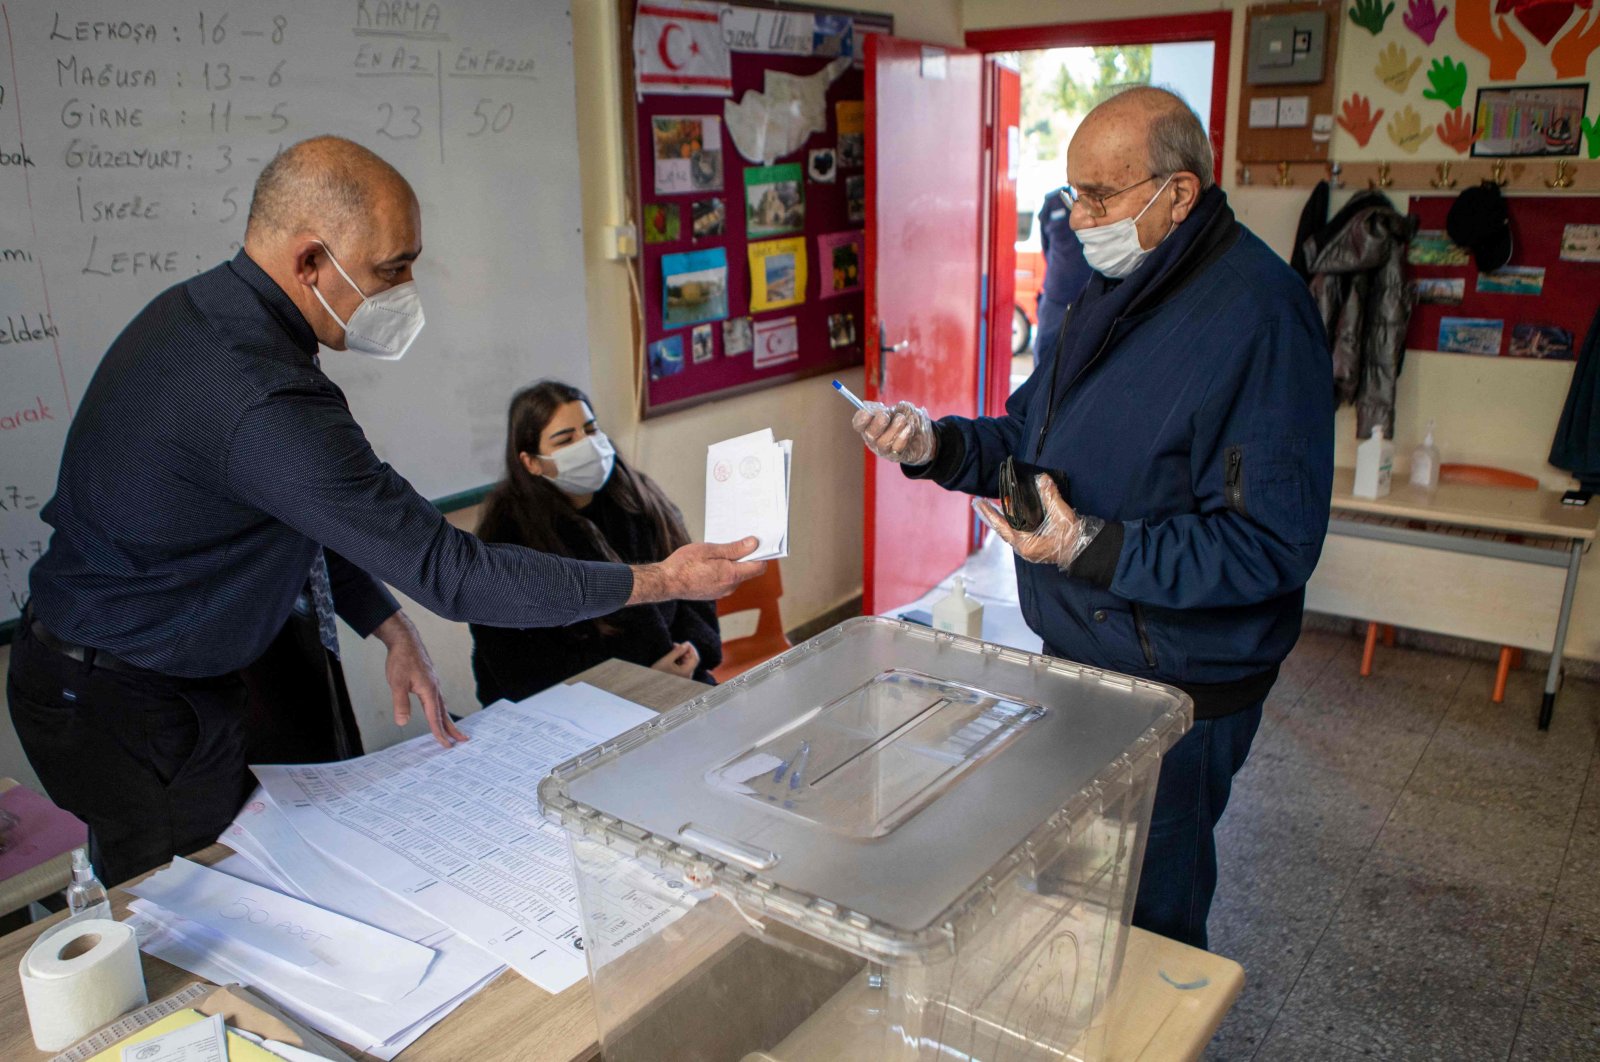 A Turkish Cypriot arrives to cast his ballot at a polling station in Lefkoşa, Turkish Republic of Northern Cyprus, Jan. 23, 2022. (AFP Photo)